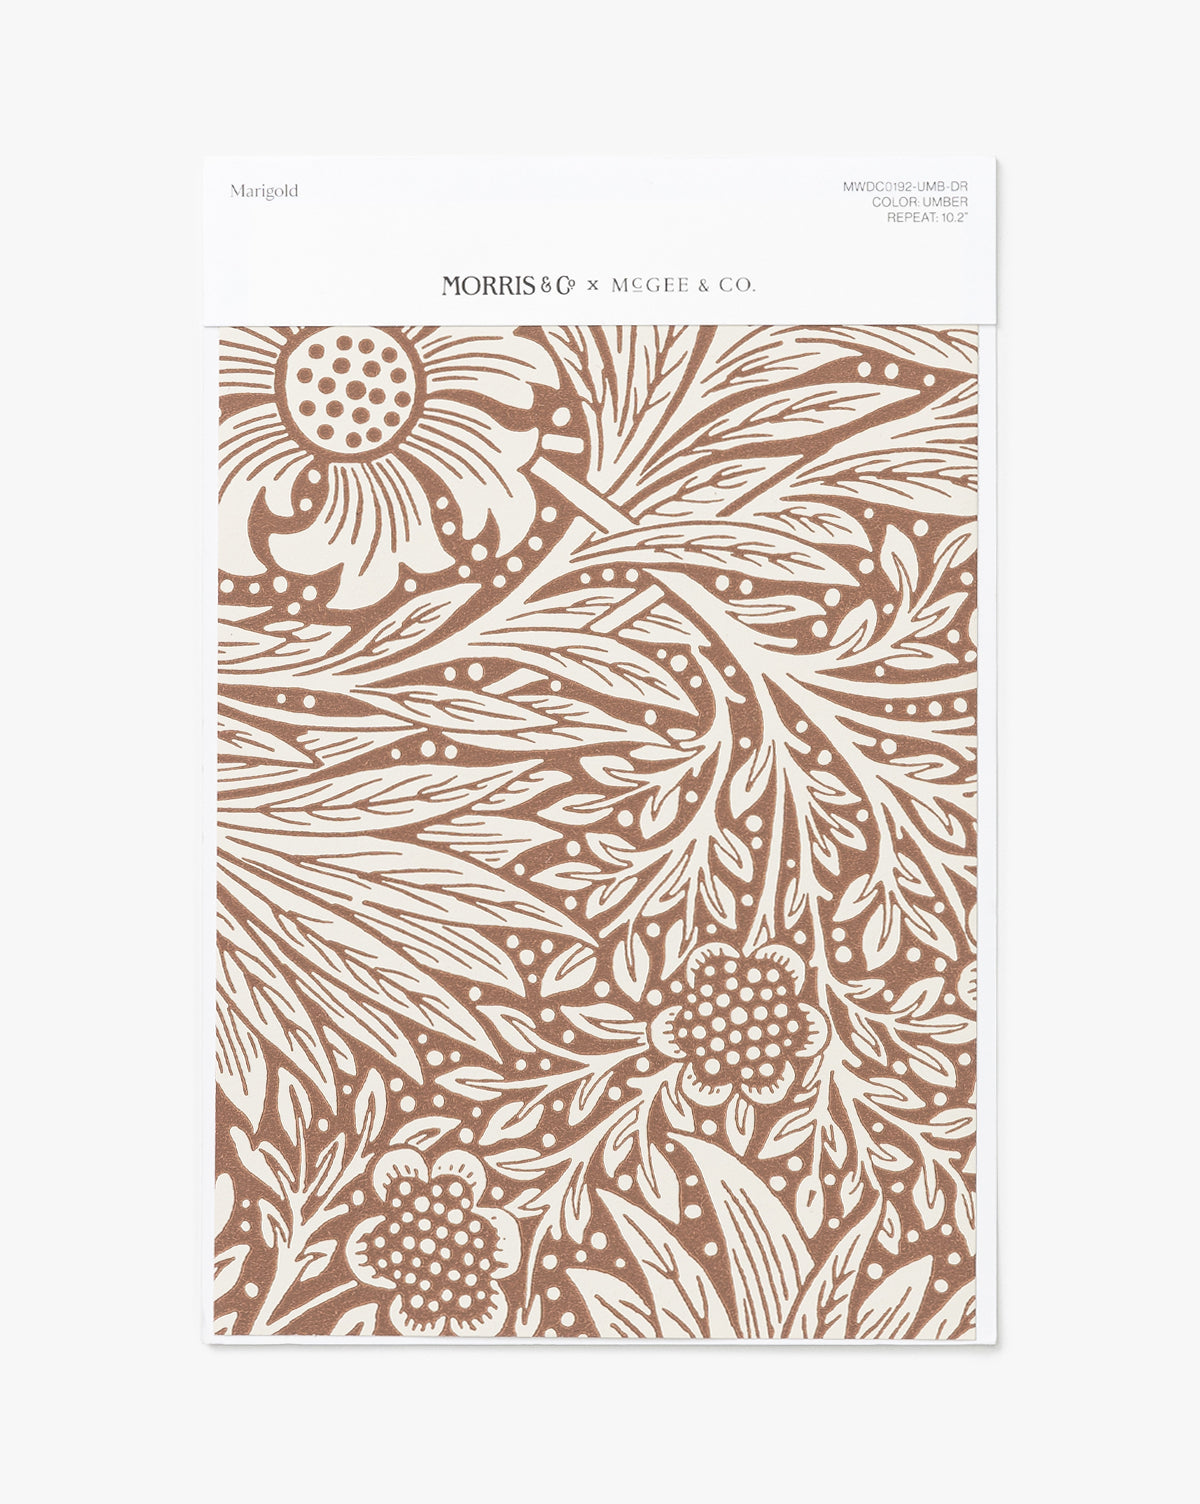 McGee & Co., Morris & Co. x McGee & Co. Marigold Umber Wallpaper Swatch